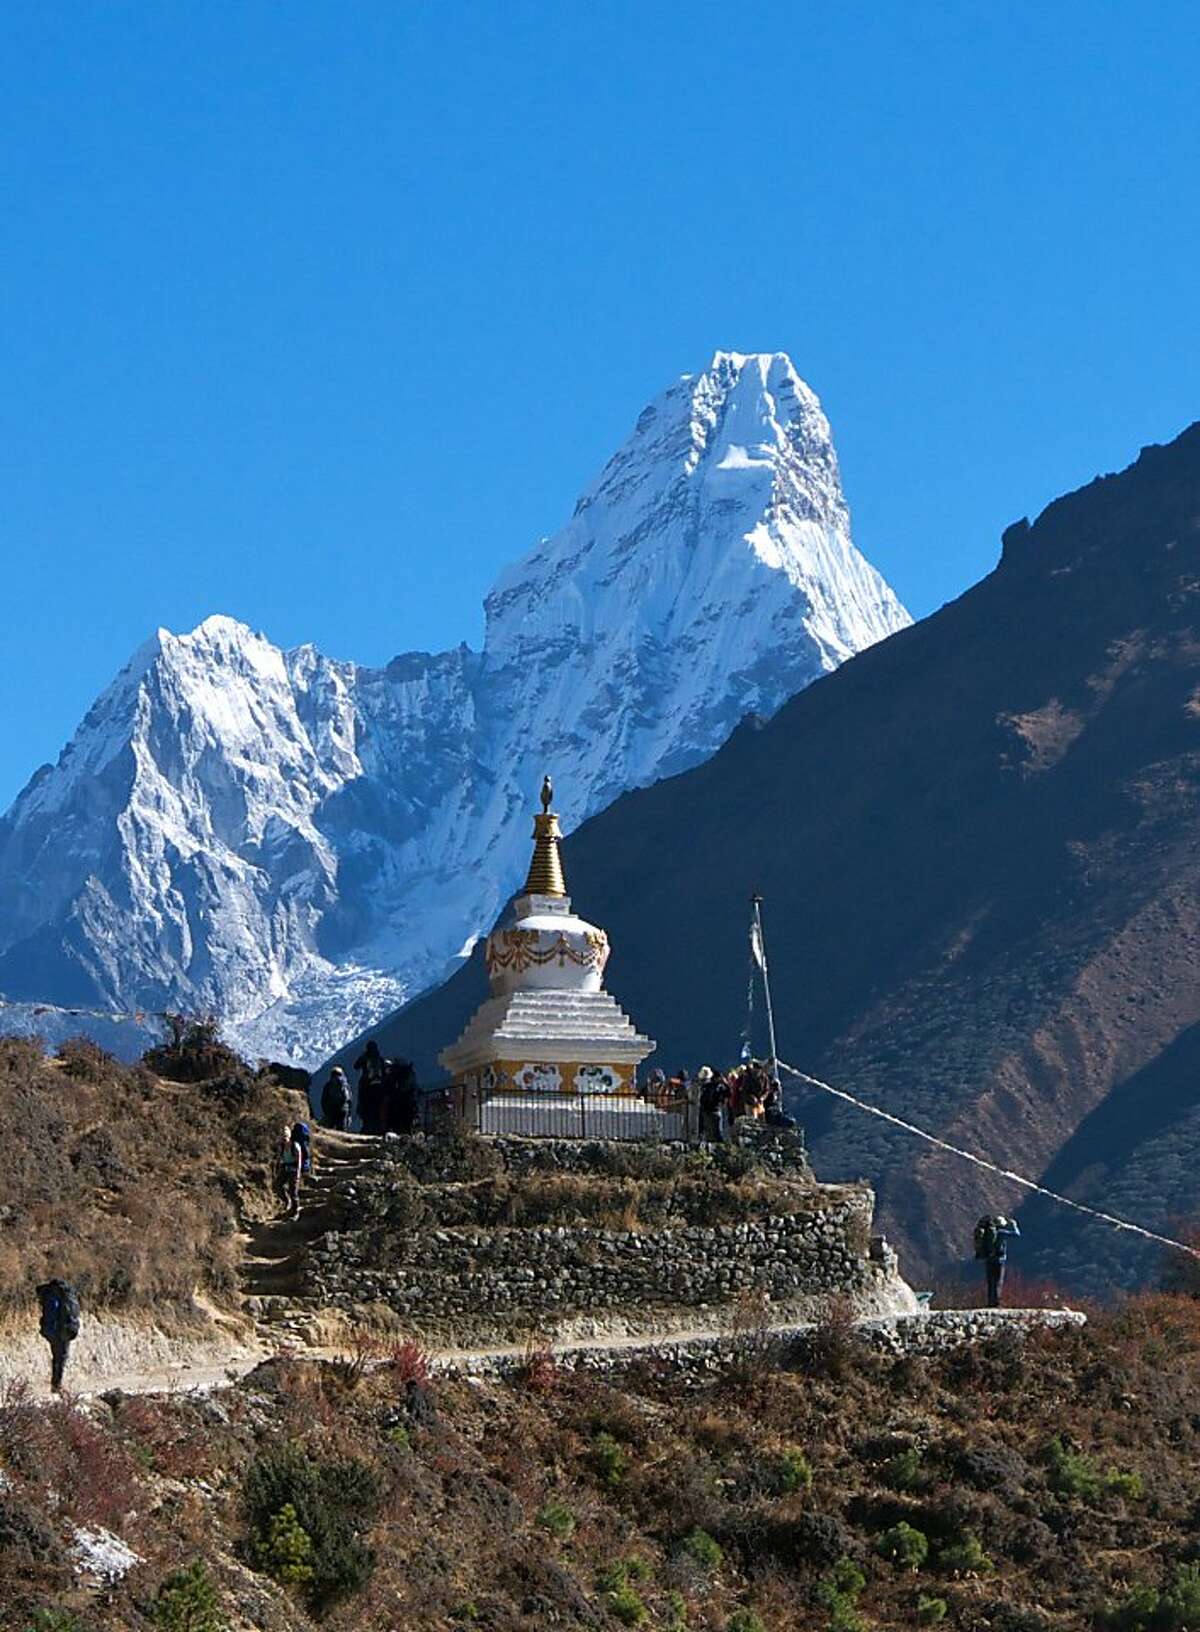 A chorten echoes the stunning shape of Ama Dablam, considered by many to be the most beautiful peak in the Himalayas.